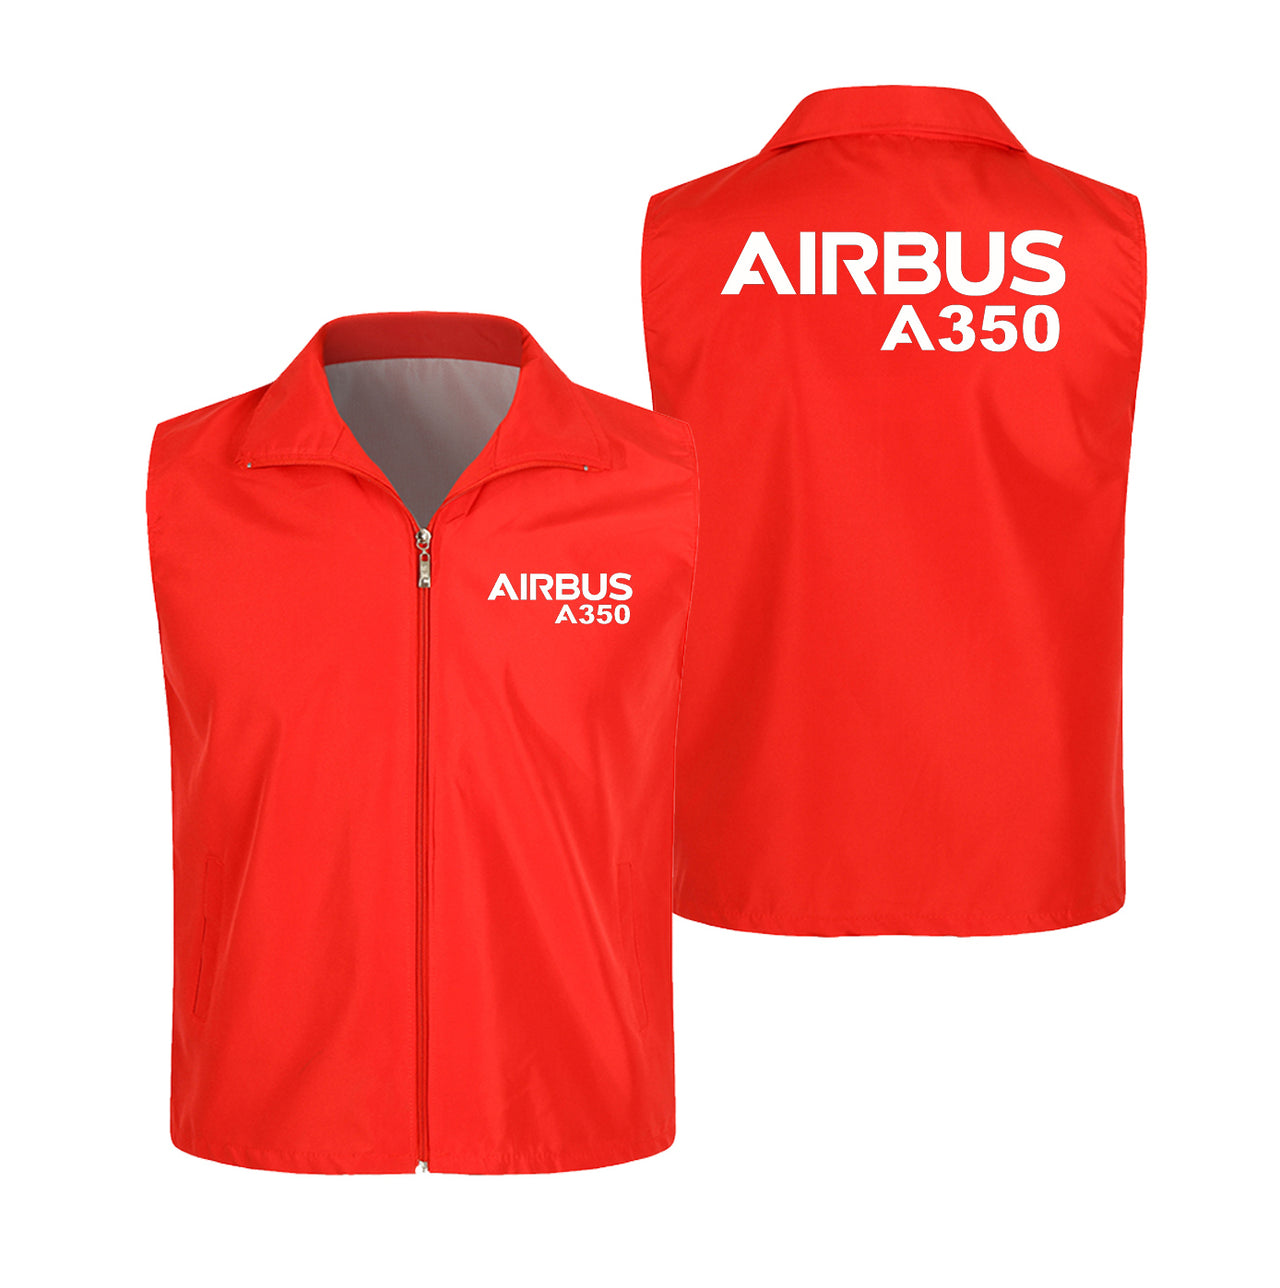 Airbus A350 & Text Designed Thin Style Vests